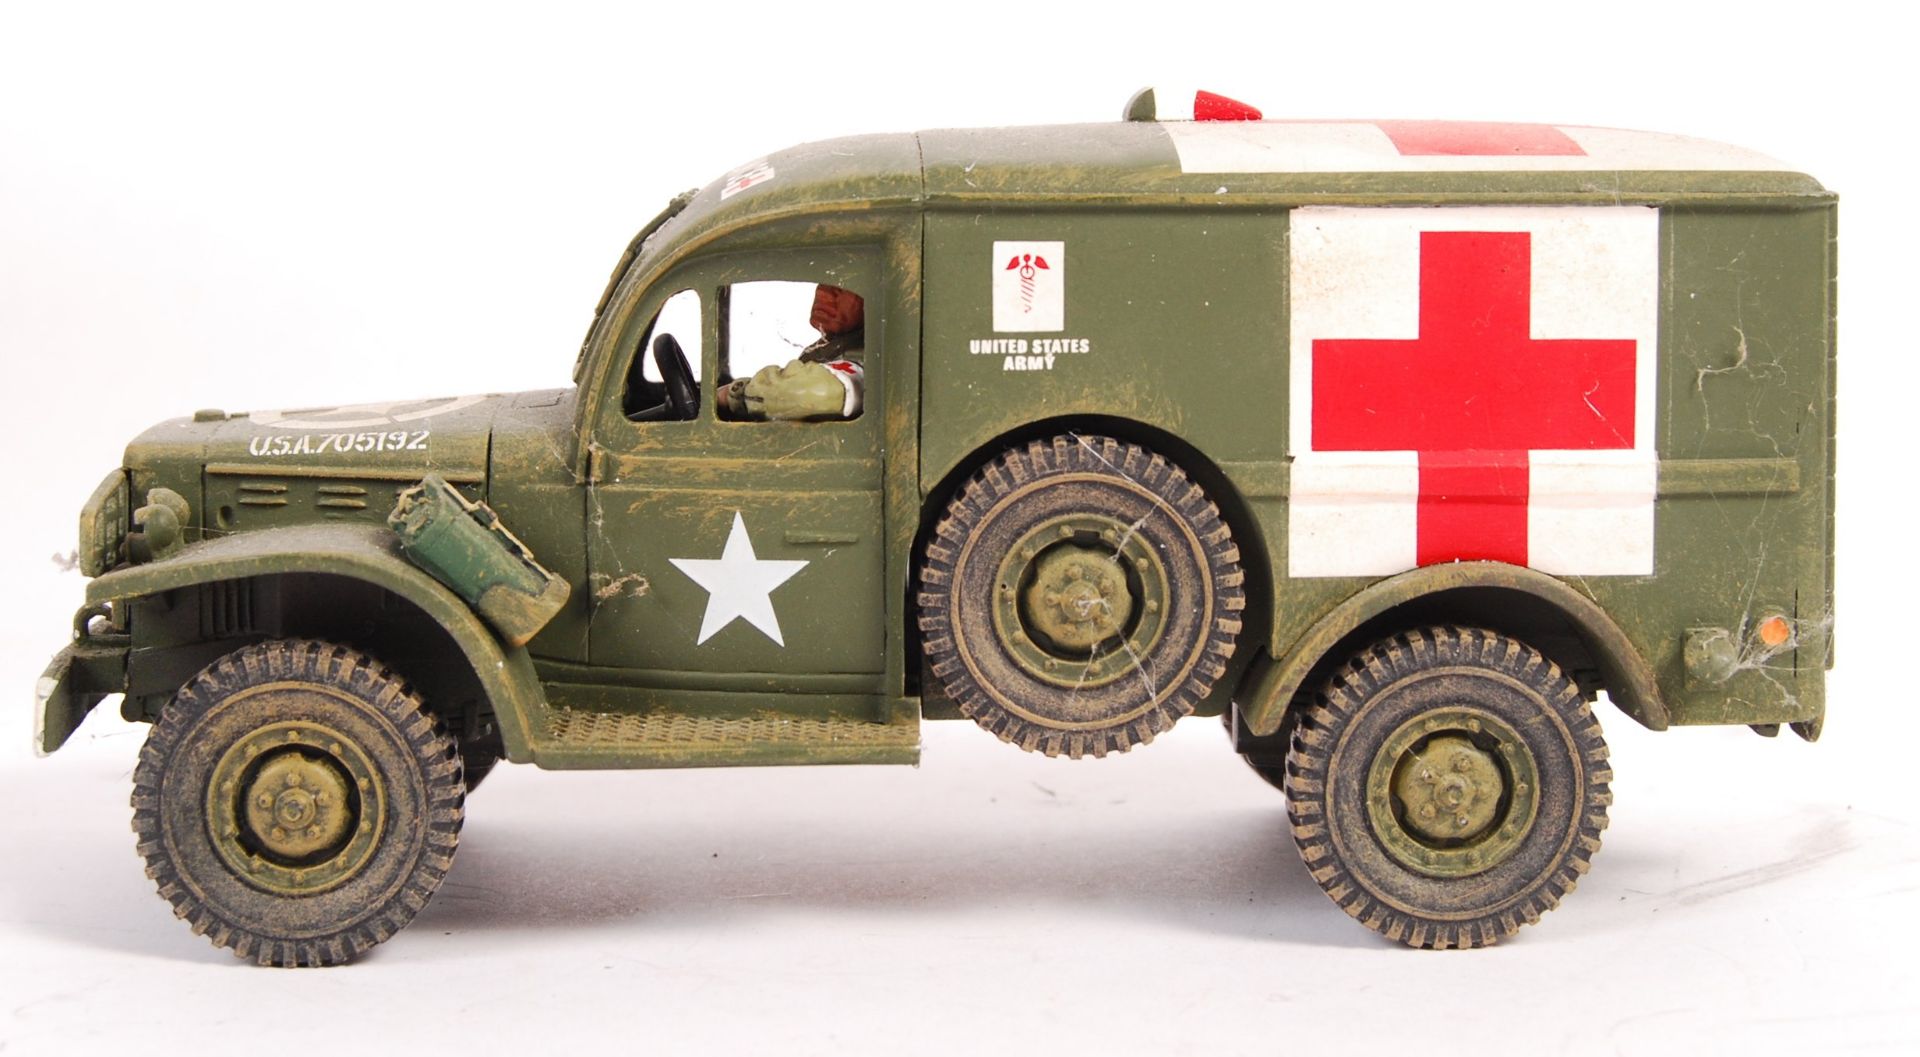 KING & COUNTRY BOXED 1:30 SCALE MODEL BATTLE OF THE BULGE VEHICLE - Bild 4 aus 6